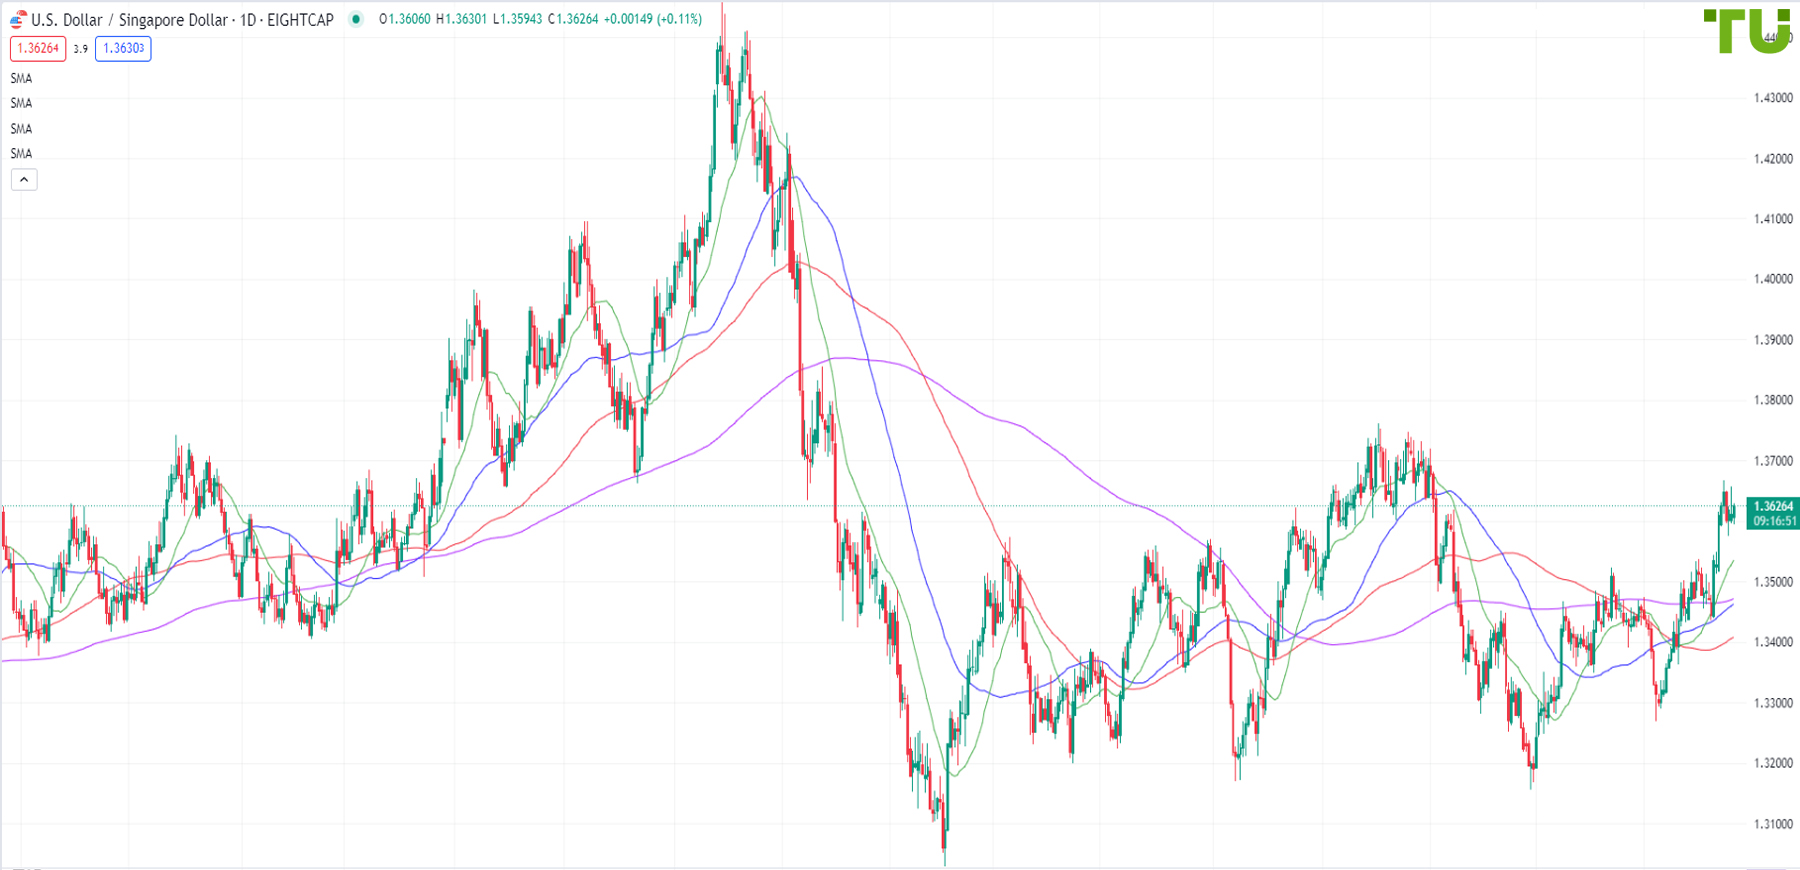 USD/SGD is trying to solidify above 1.3600